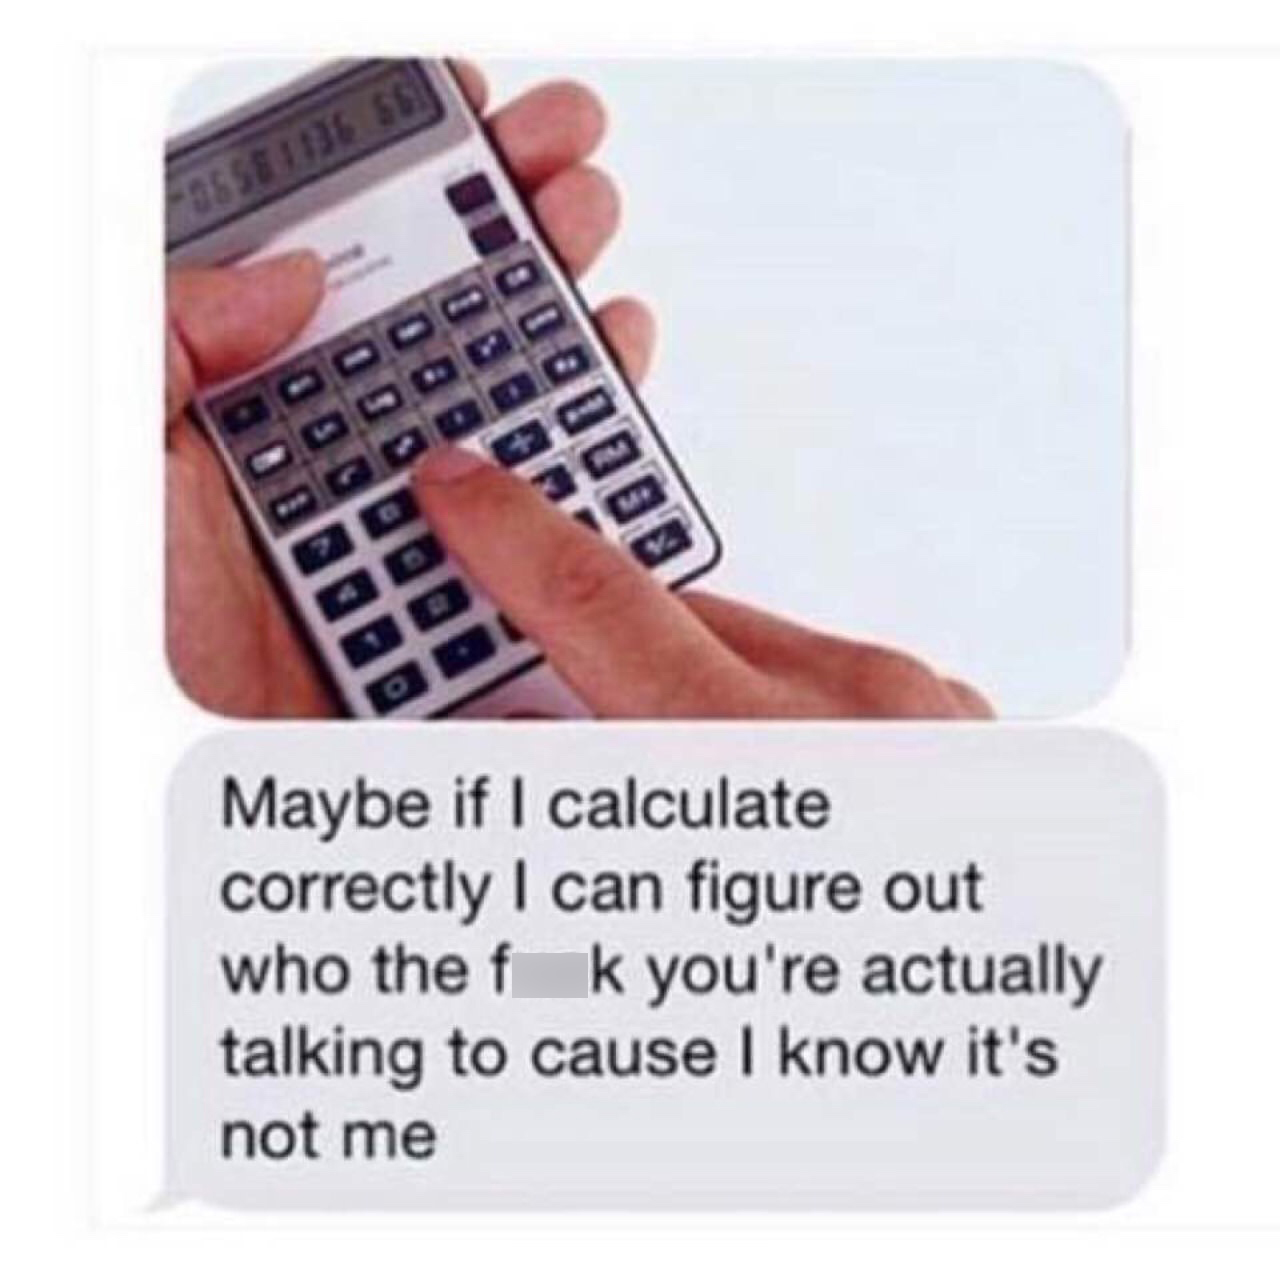 meme let me calculate who you re talking - Fosse 1136 661 Podogo Maybe if I calculate correctly I can figure out who the f k you're actually talking to cause I know it's not me